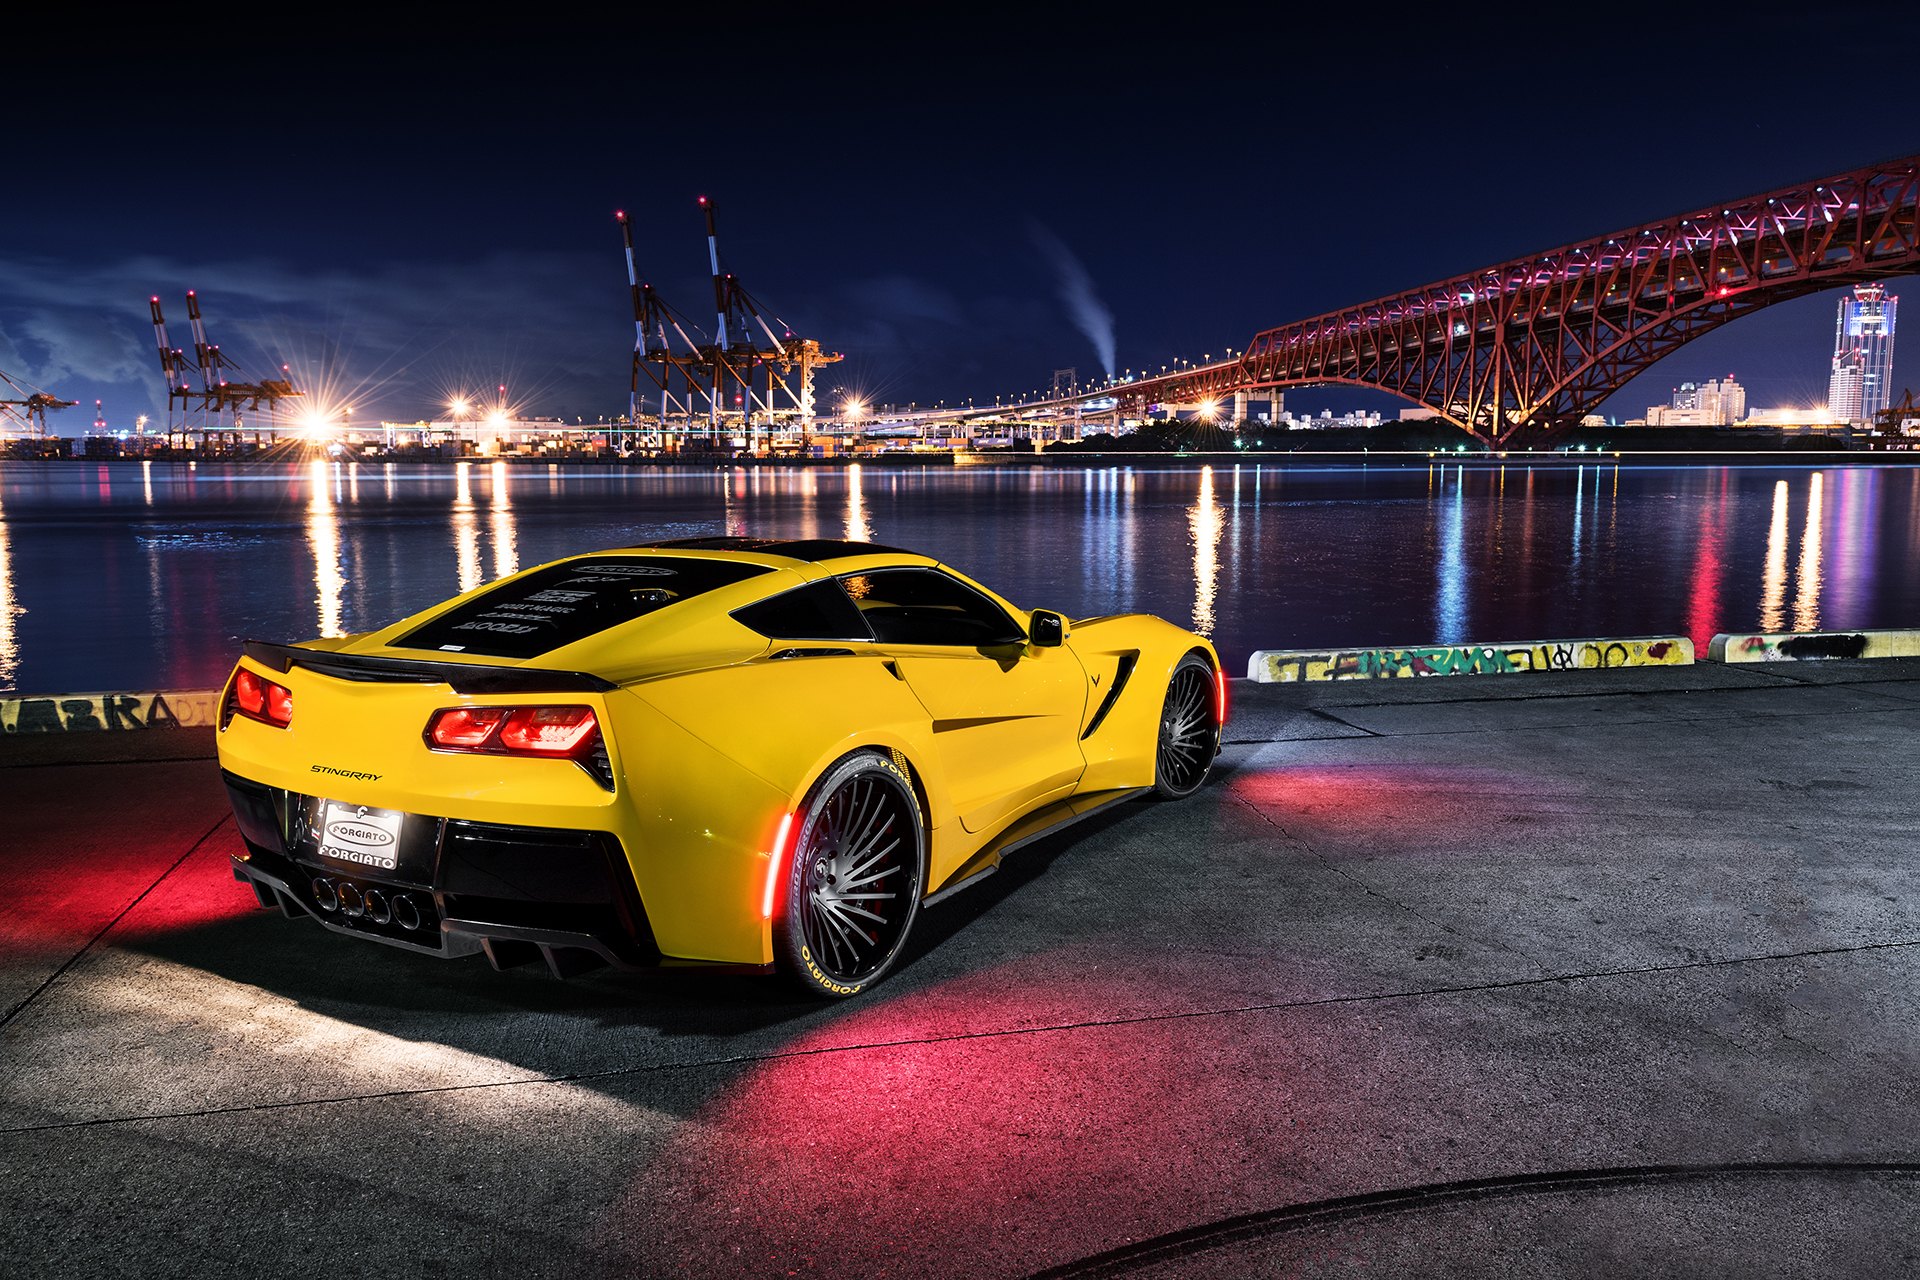 Aftermarket Rear Diffuser on Yellow Chevy Corvette - Photo by Forgiato